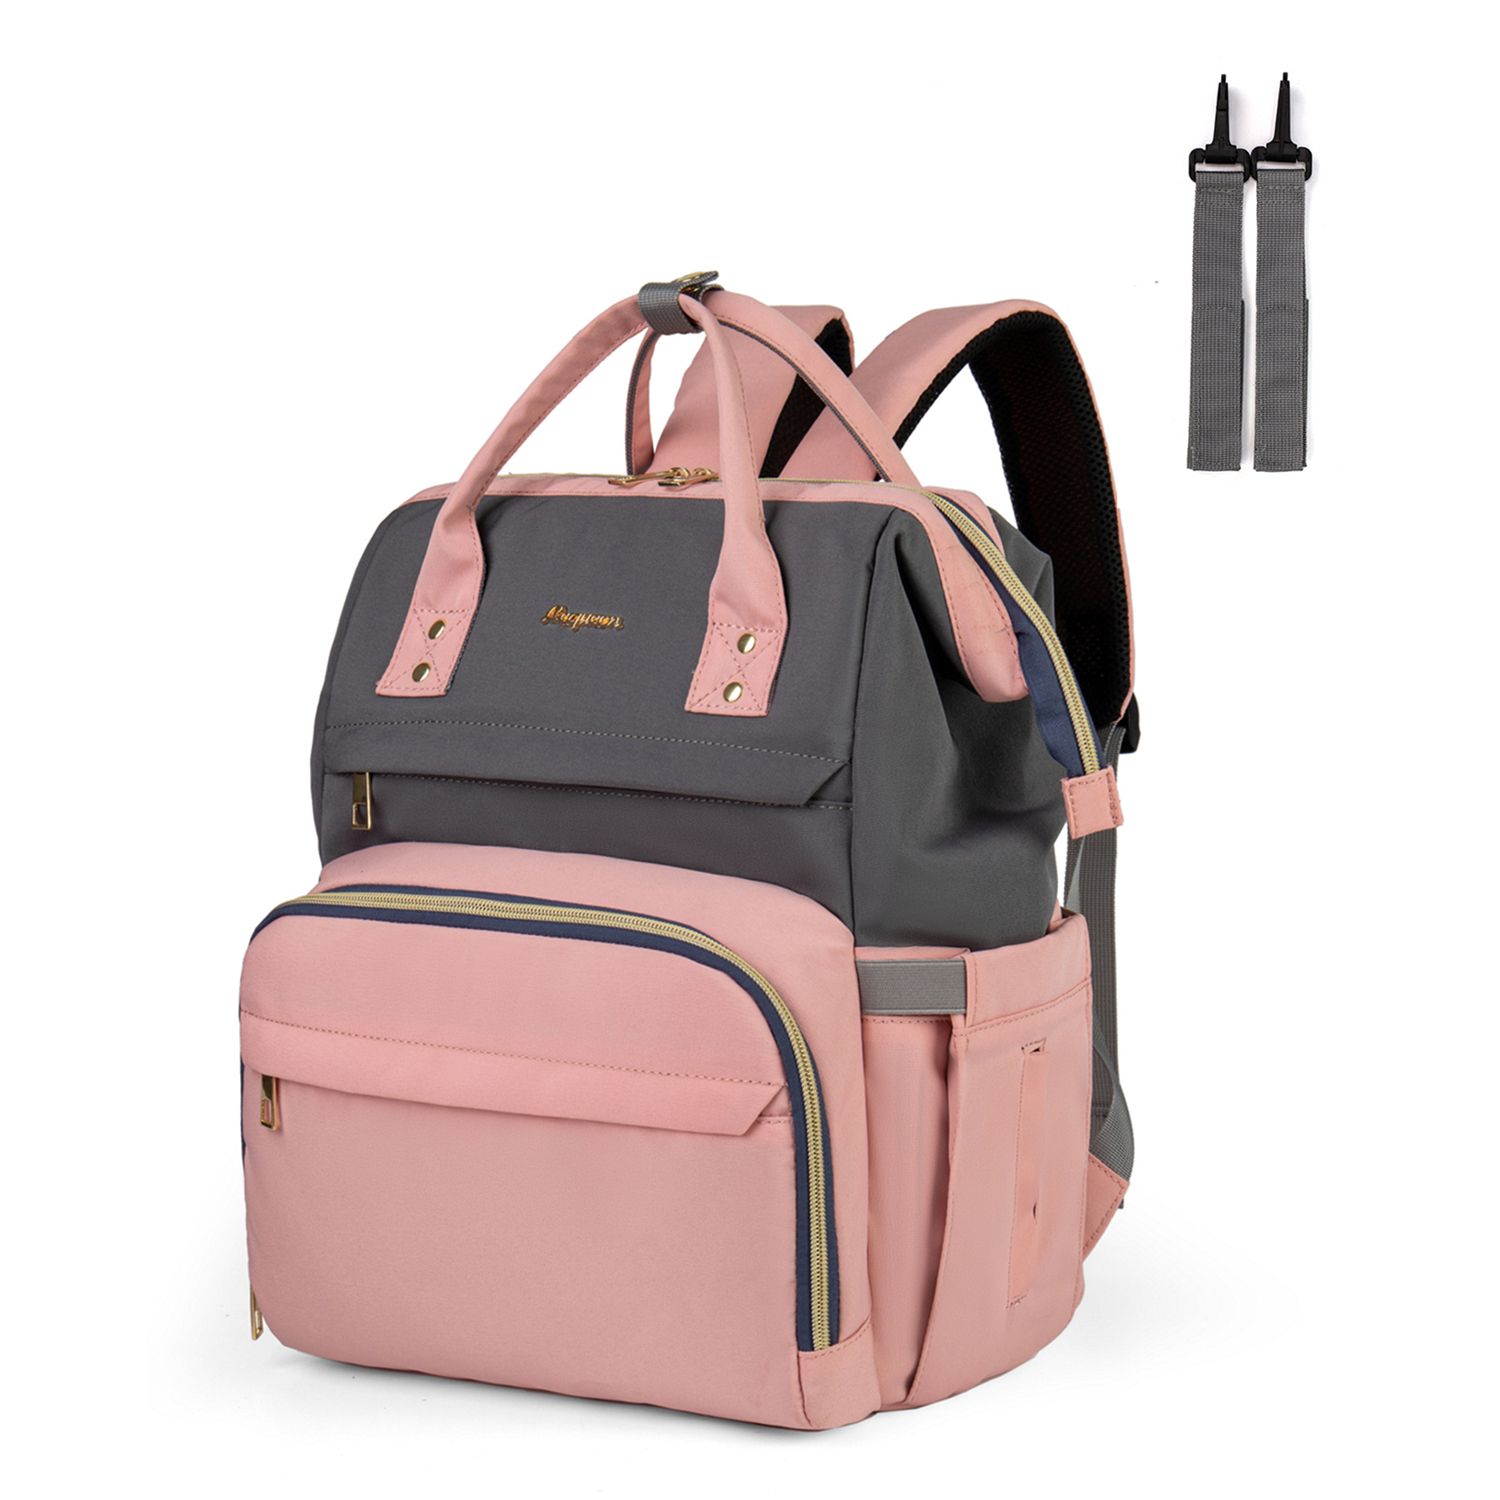 Baby Bag Backpack Baby Bag Multifunction Waterproof Large Capacity Maternity Back Pack With Stroller Straps